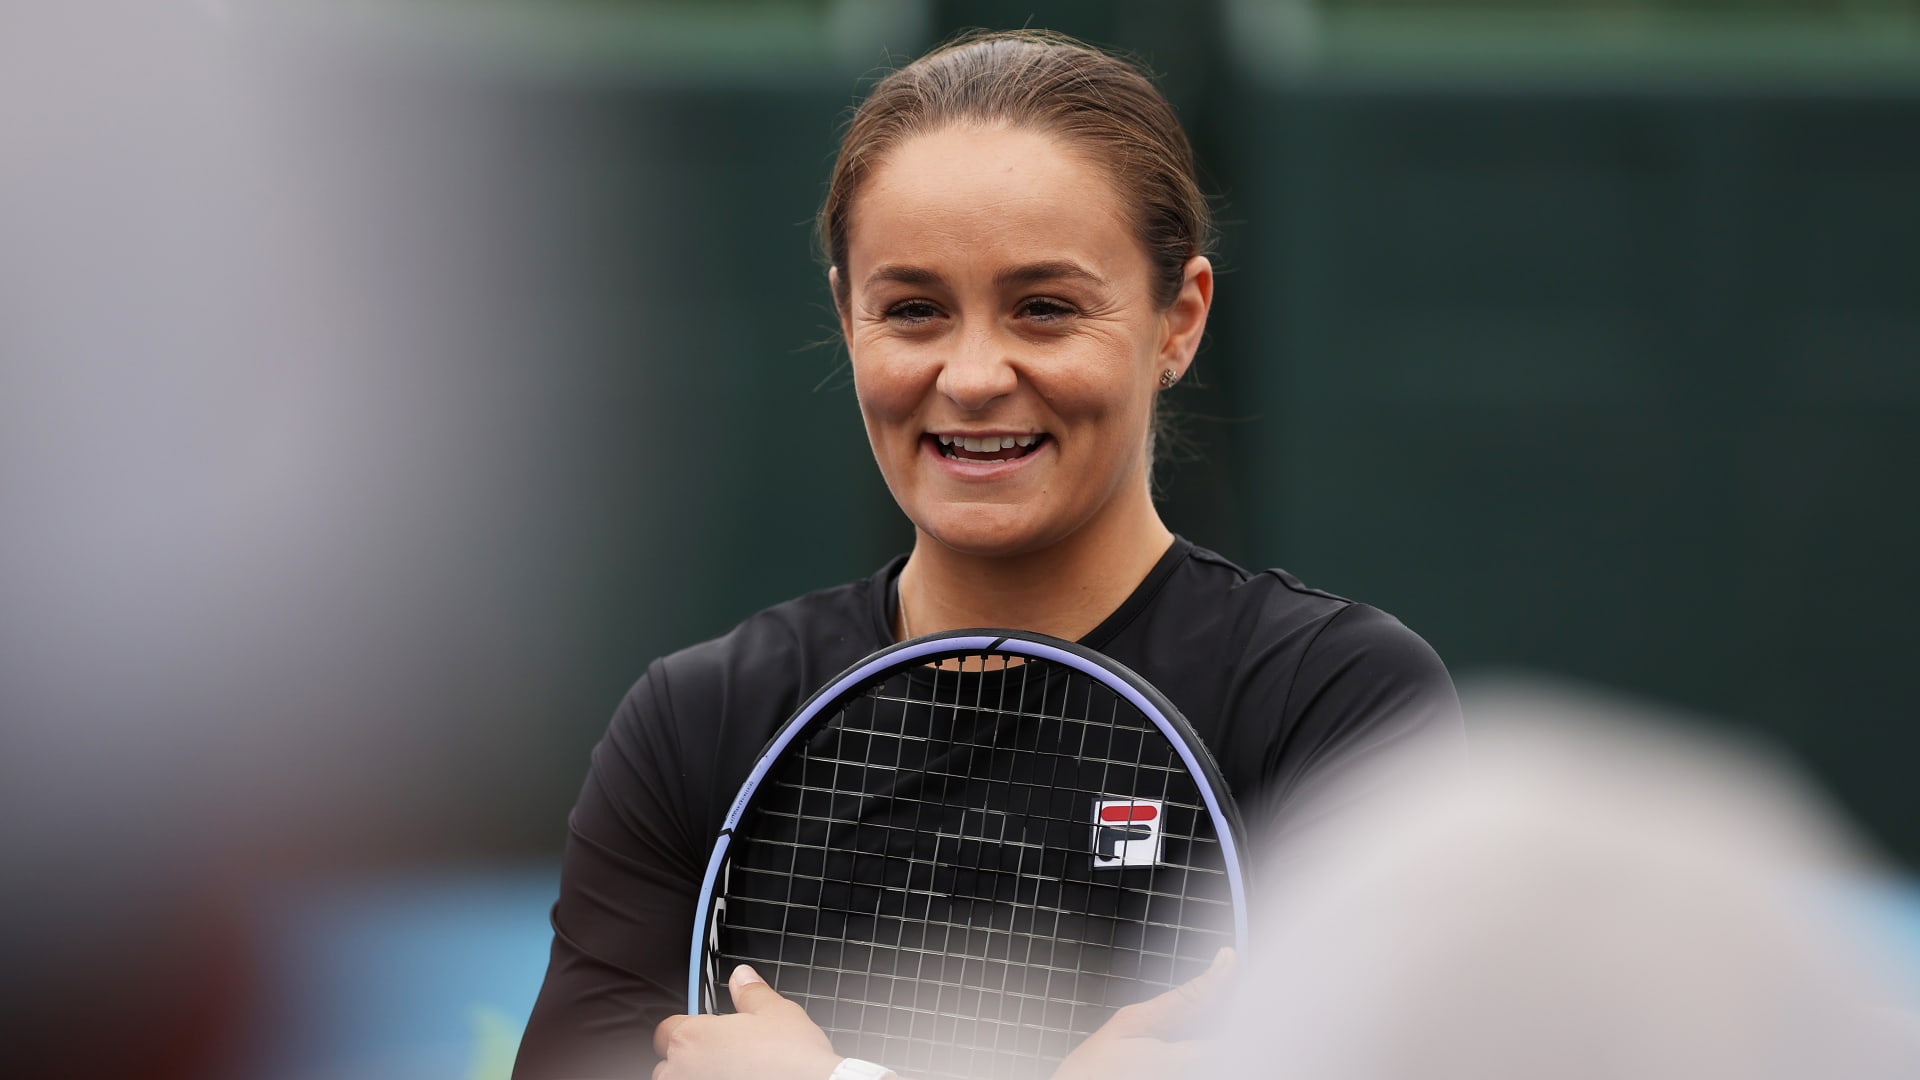 ‘I’m spent’: Ash Barty’s shock retirement from tennis offers some vital career lessons – CNBC